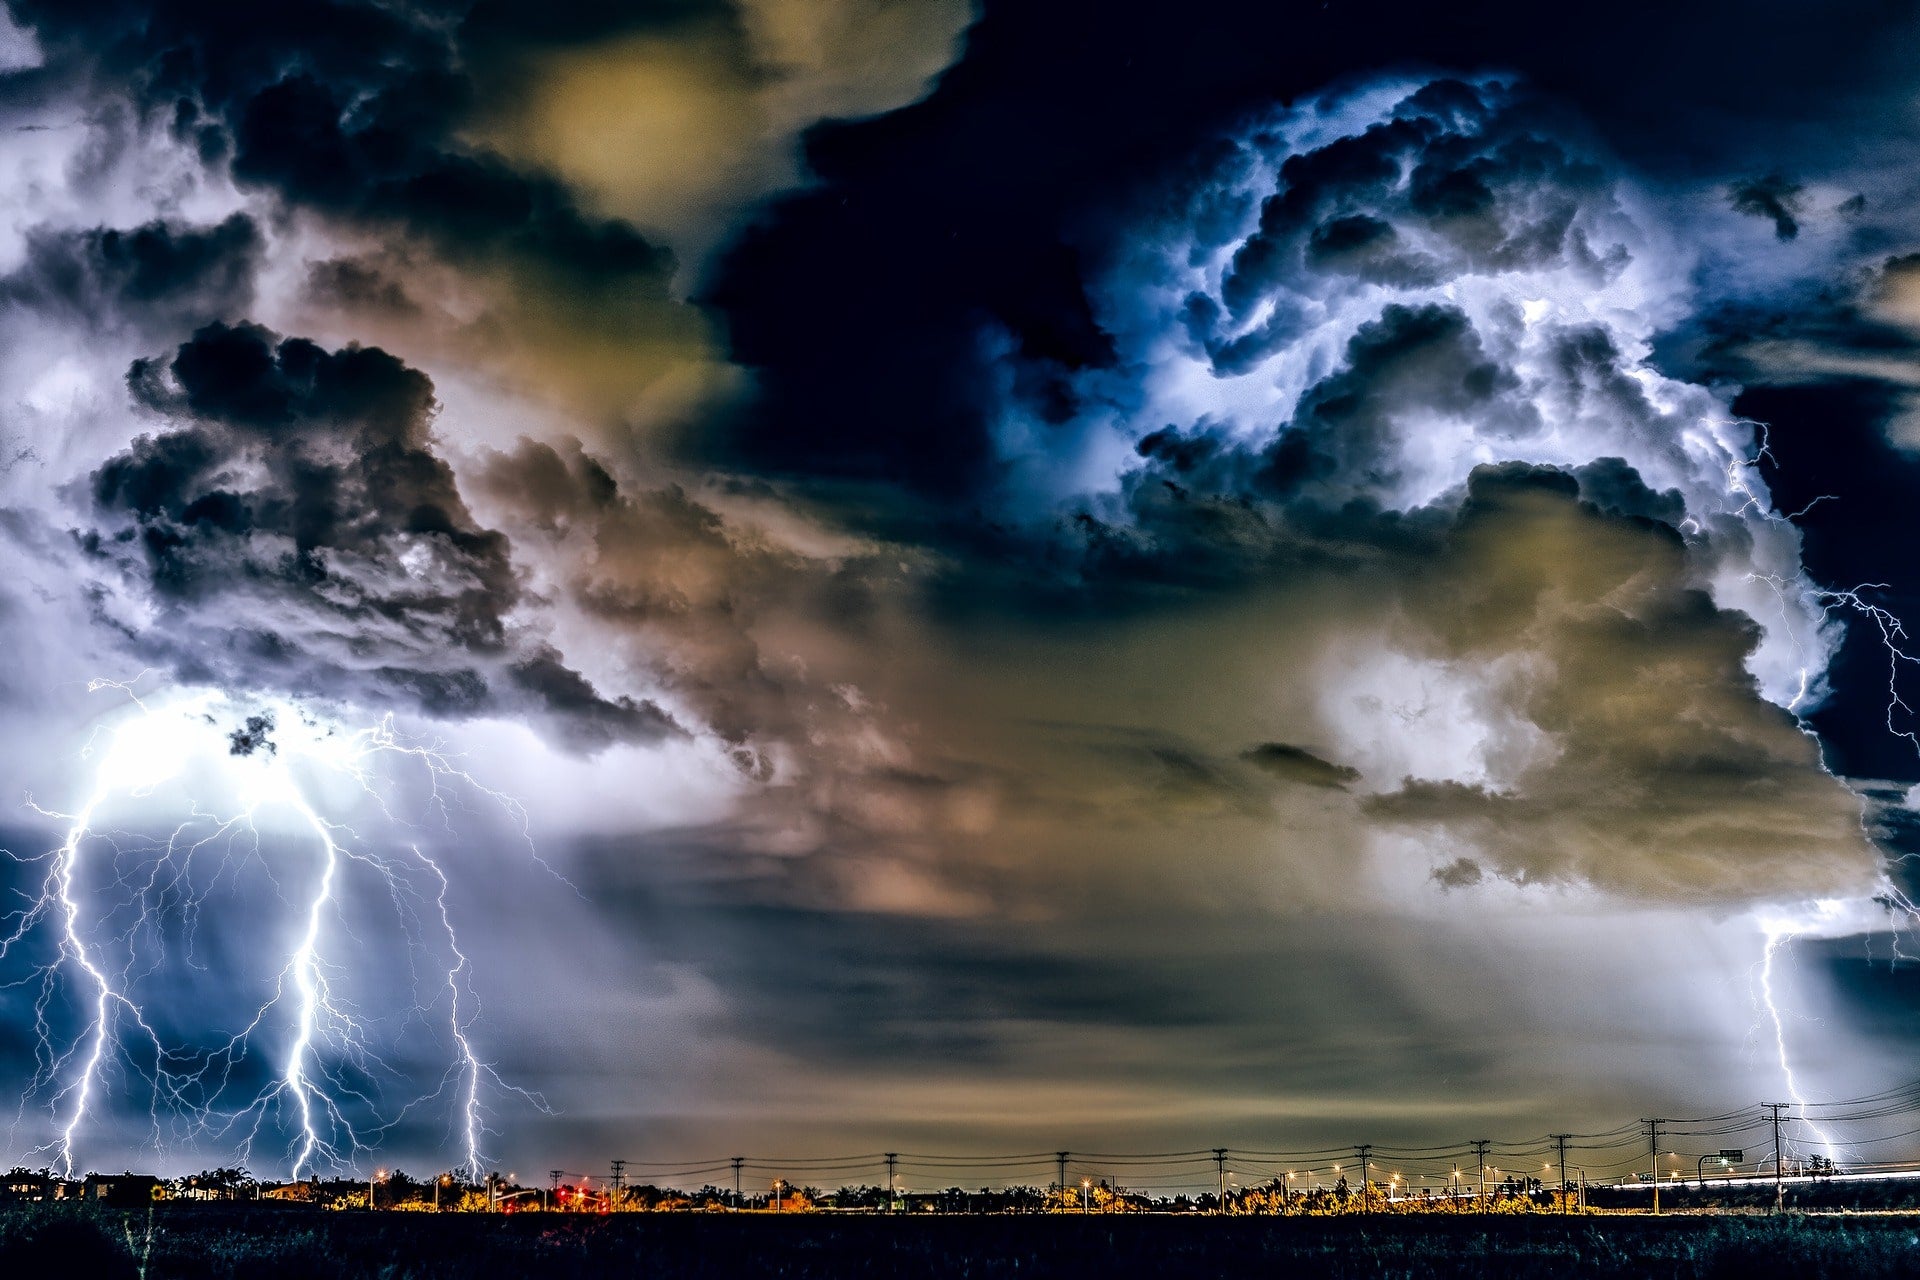 What Is Stormlapse Photography?